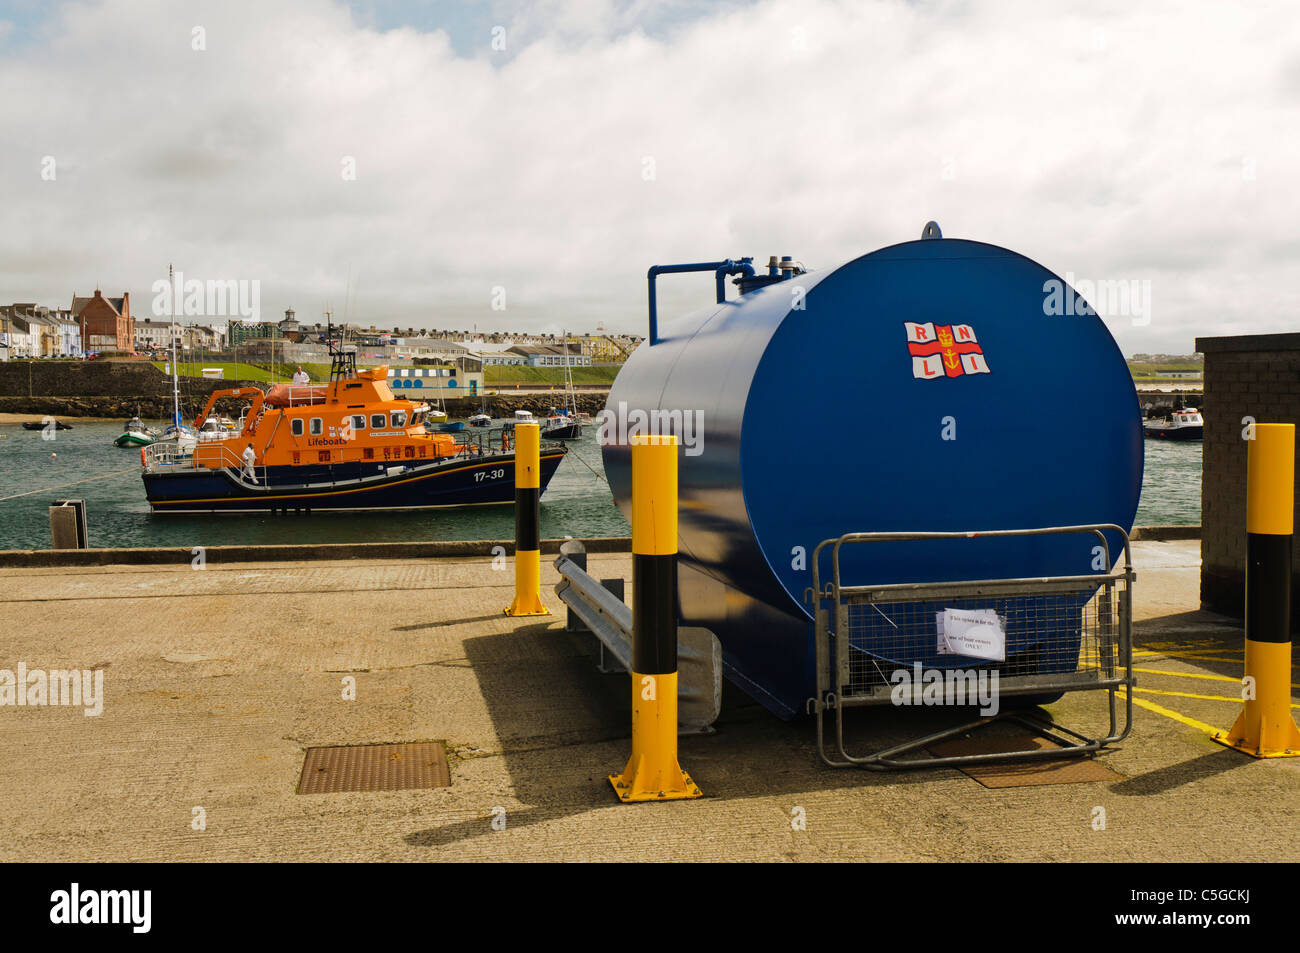 Diesel fuel tank for a RNLI life boat Stock Photo